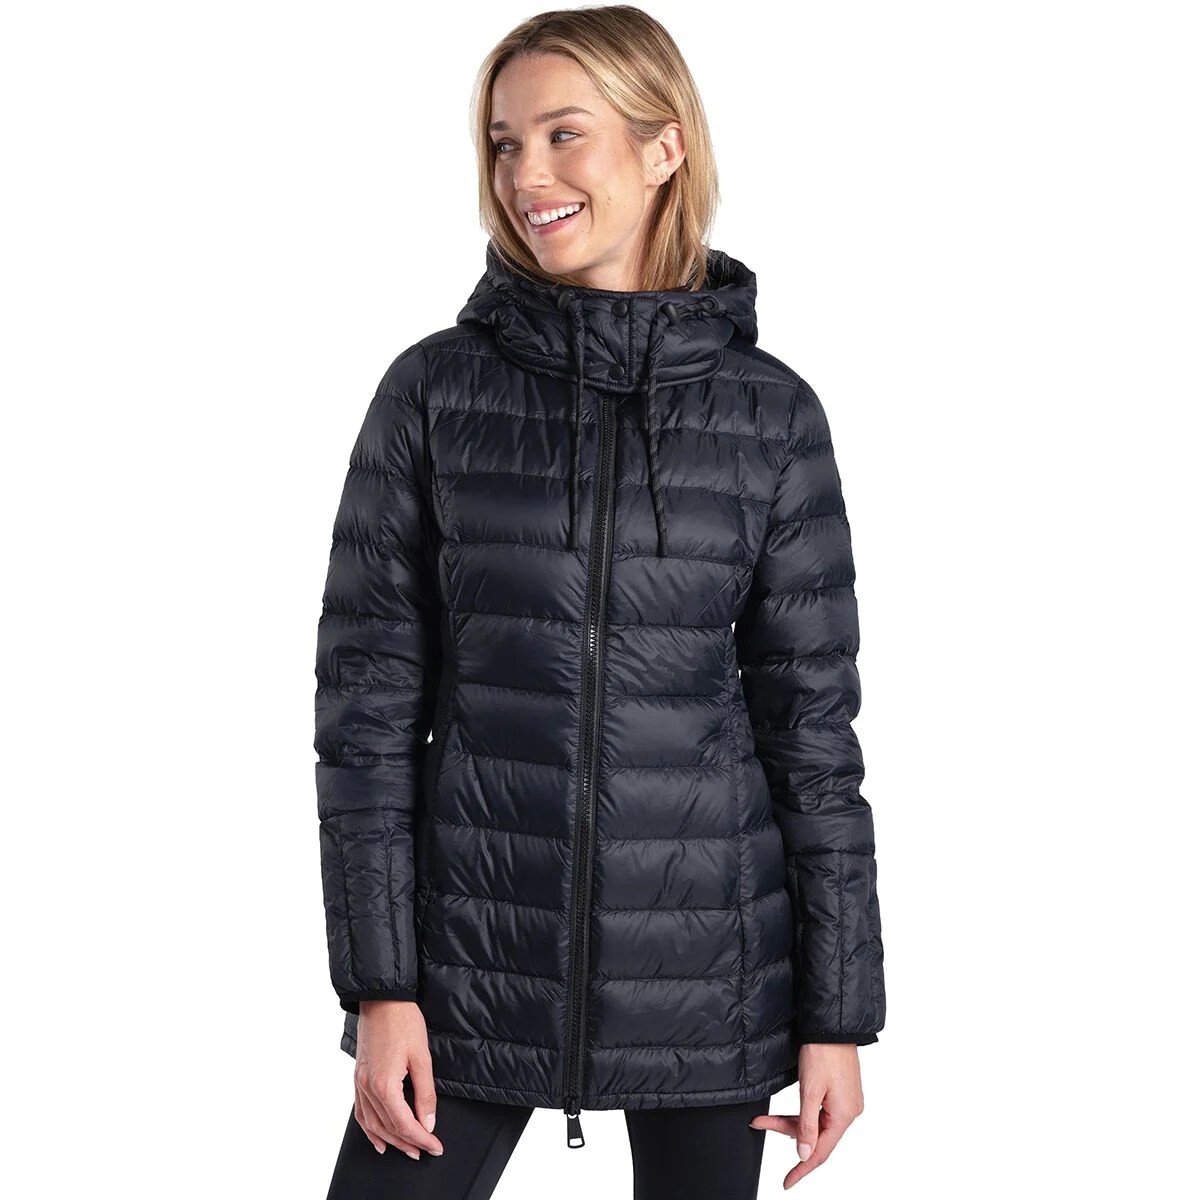 10 Packable Puffer Jackets That Make Winter Travel Easy | Well+Good